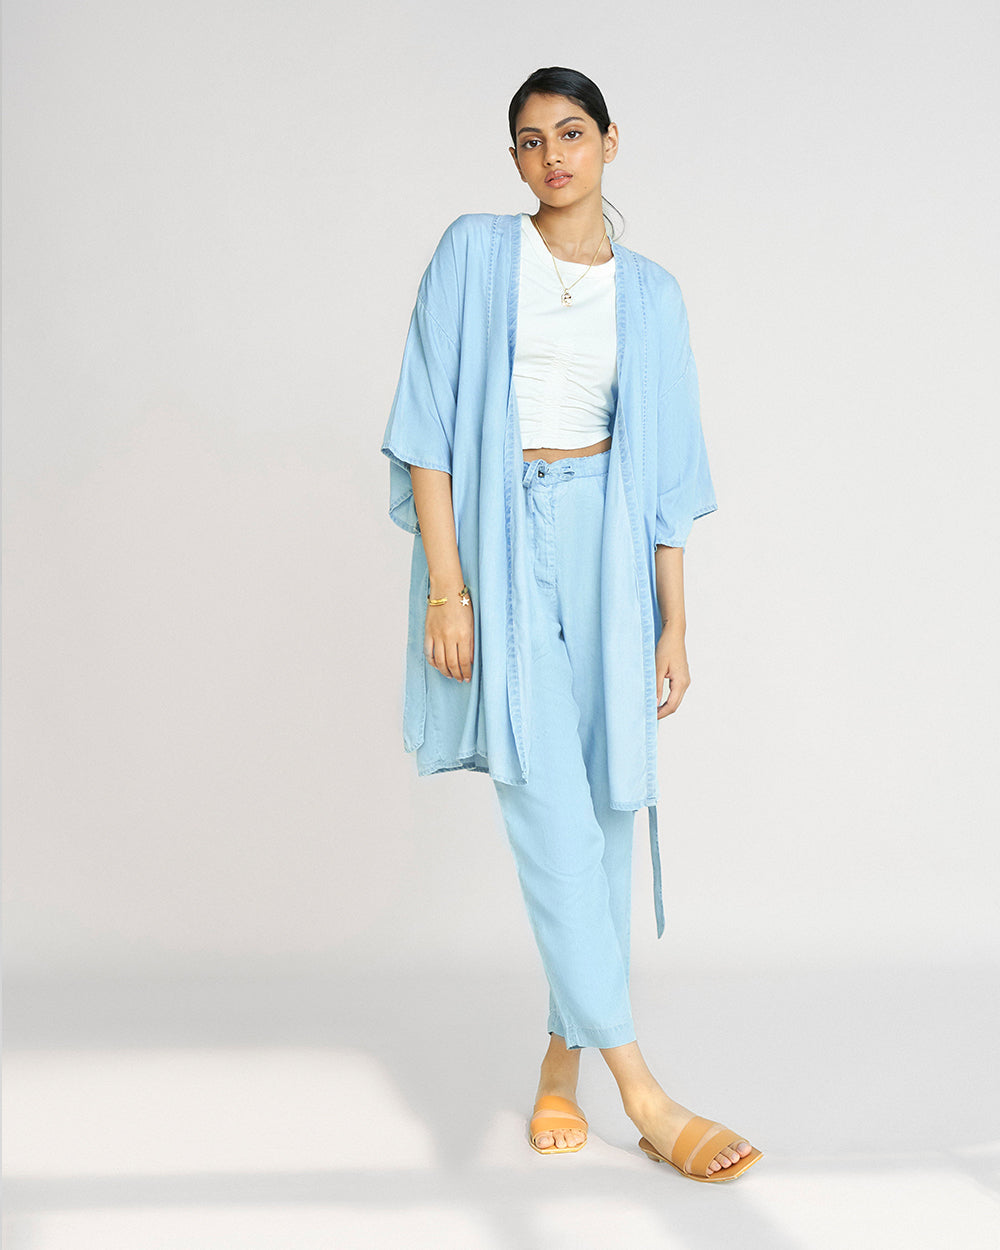 Blue Kimono Overlay at Kamakhyaa by Reistor. This item is Blue, Casual Wear, Denim, Natural, Overlays, Relaxed Fit, Shrugs, Solids, Tencel, Womenswear